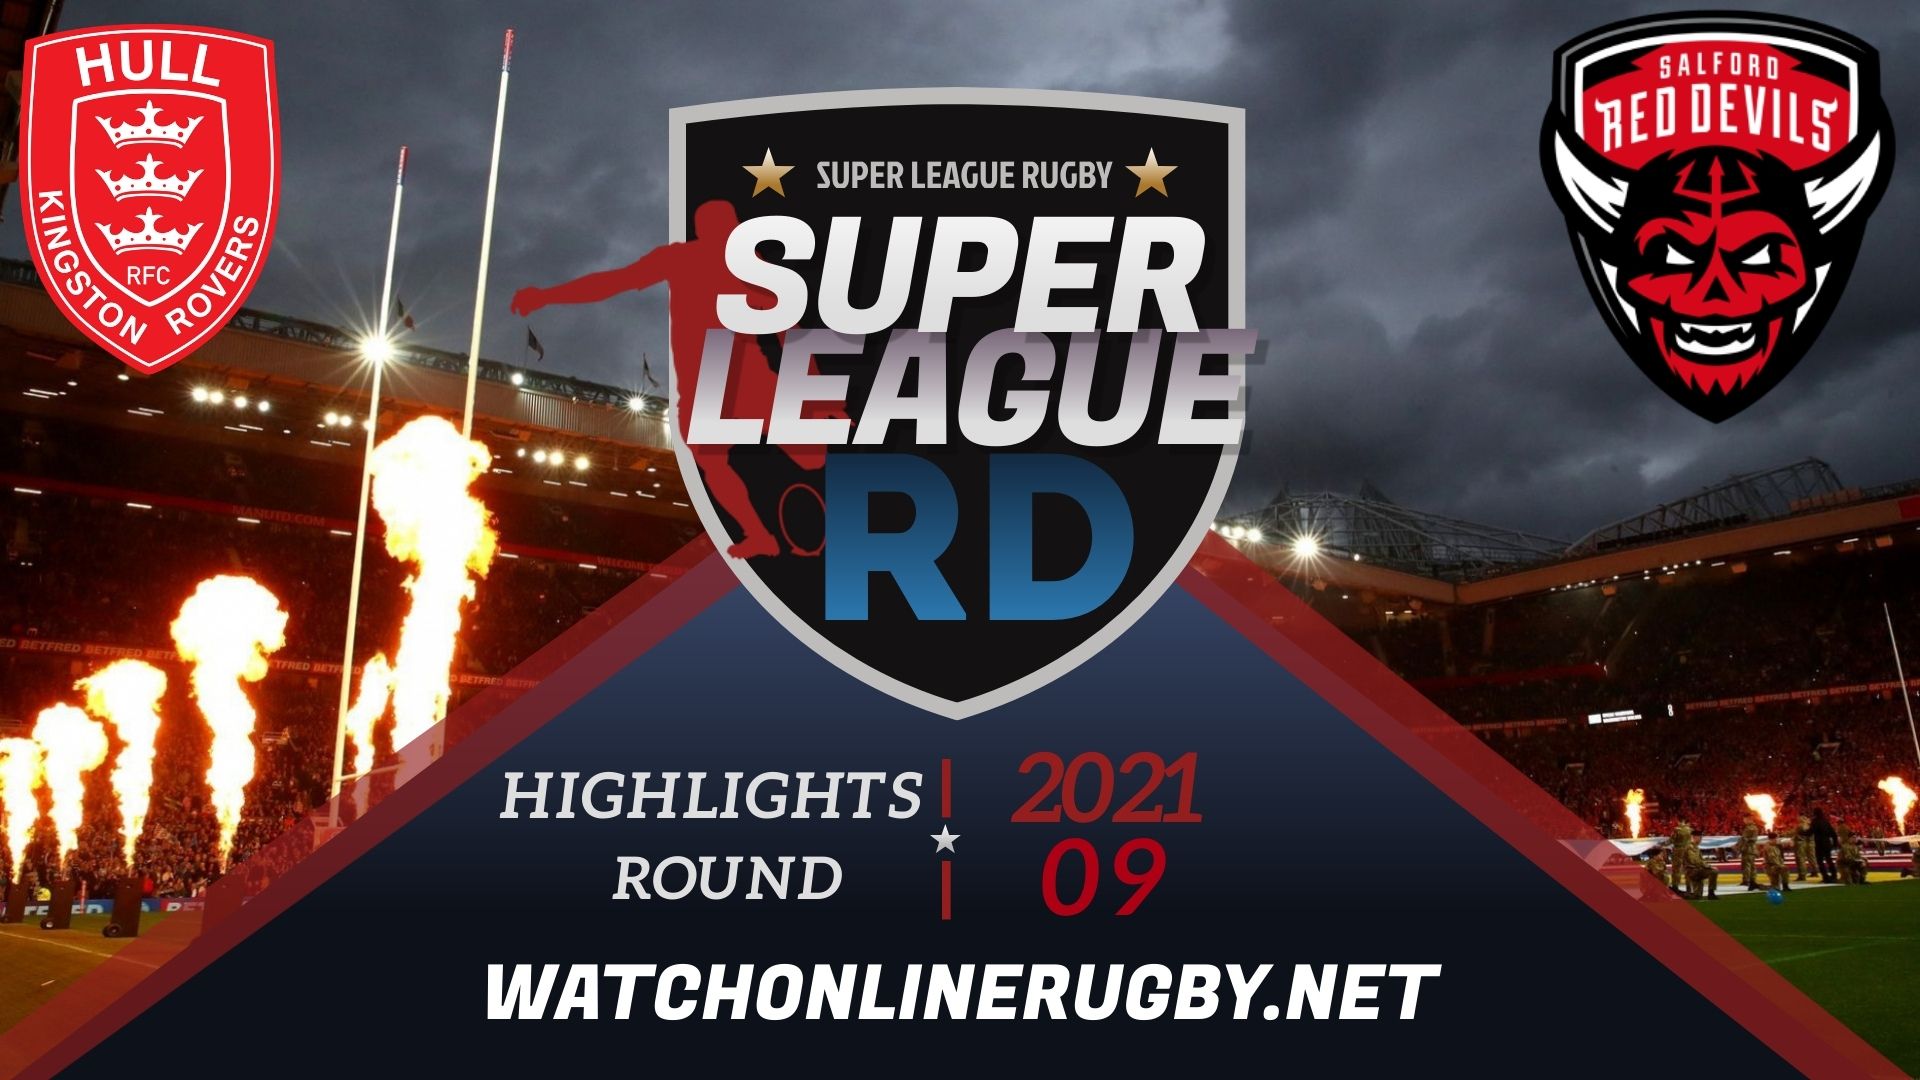 Hull KR Vs Salford Red Devils Super League Rugby 2021 RD 9